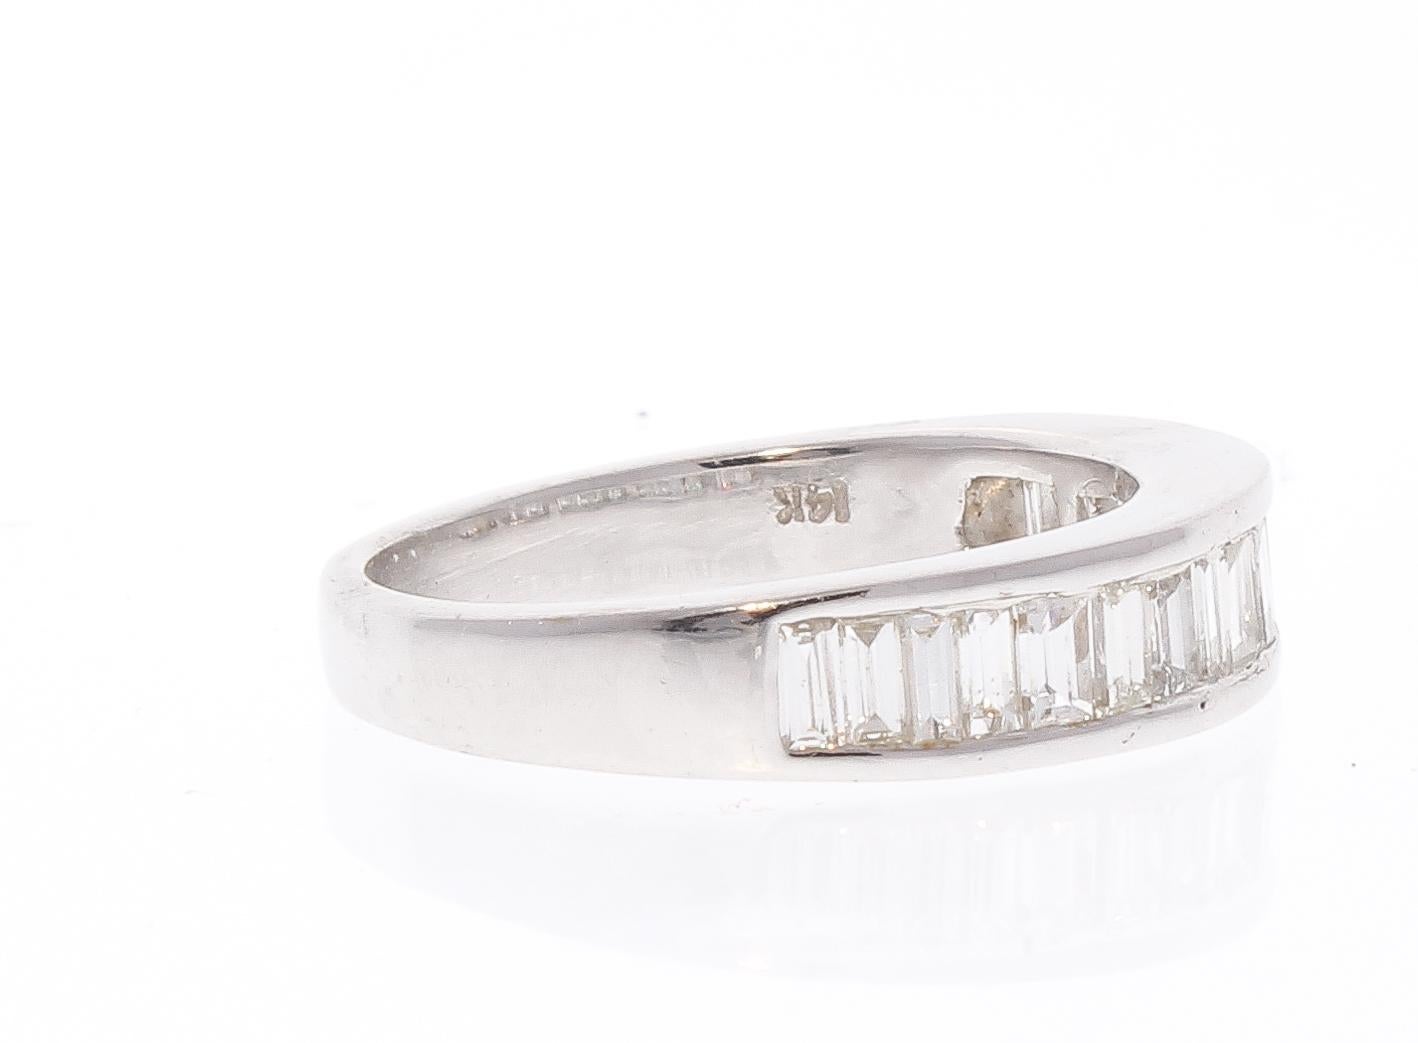 This brightly polished 14 karat white gold diamond wedding stackable ring exudes ultimate style and prestige with its incredible sparkle and fire. A total of 0.50 carats of 14 shimmering baguette cut diamonds are arranged in a stunning row along the